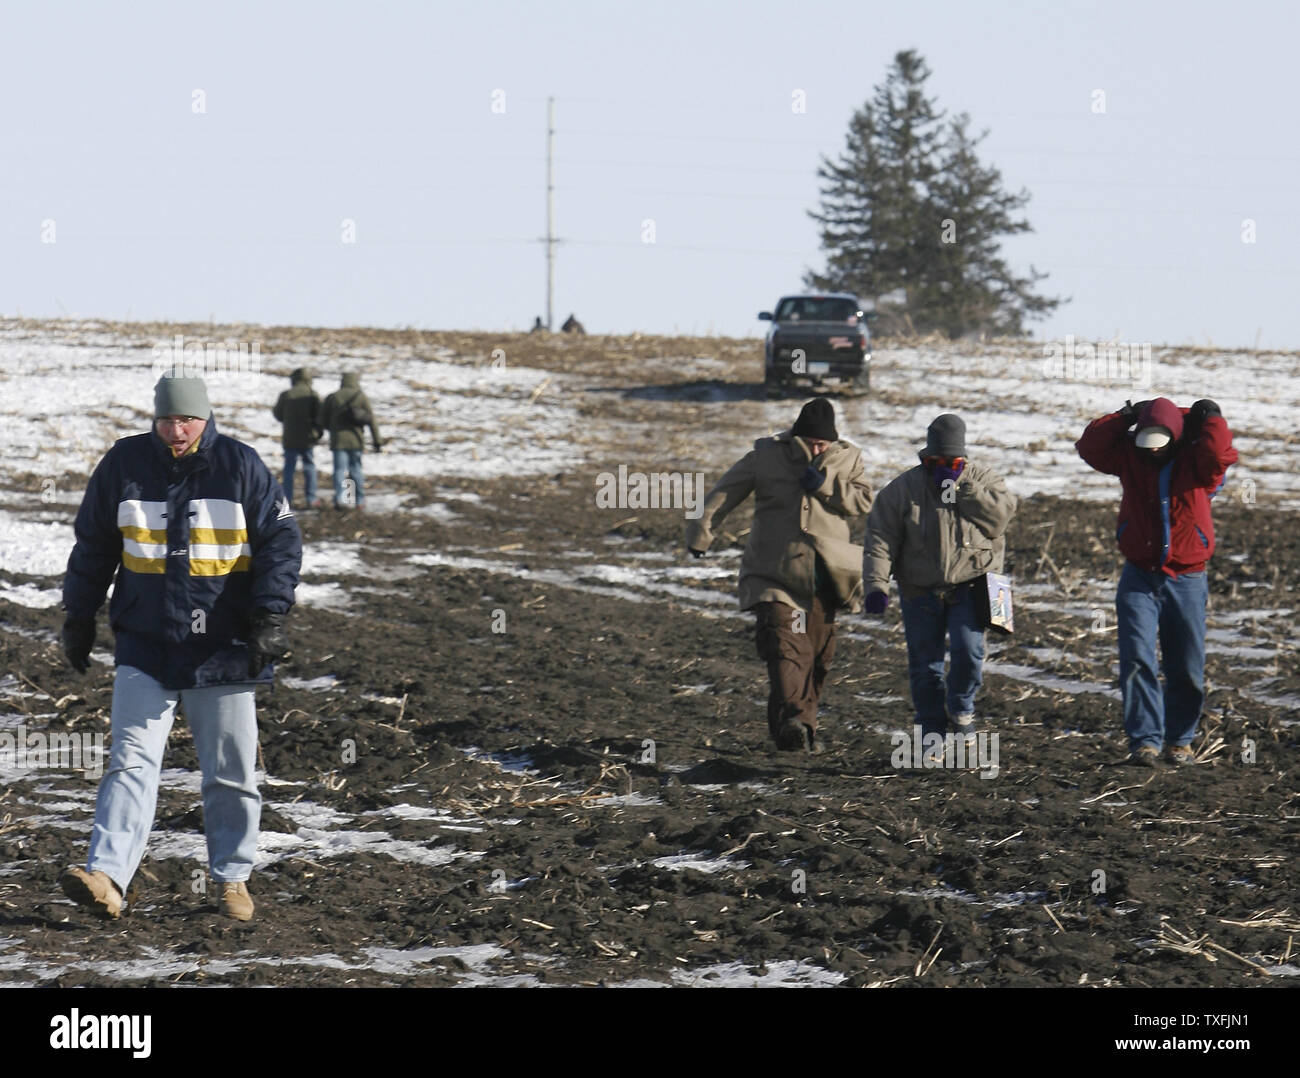 Rock 'n' roll fans brave the cold to visit the site of the plane crash that killed Buddy Holly, Ritchie Valens and J. P. 'The Big Bopper' Richardson near Clear Lake, Iowa on February 2, 2009. Singer Don McLean coined the phrase 'the day the music died' in his hit song American Pie referring to the death of the three rock 'n' roll pioneers in the early morning hours of February 3, 1959. Thousands of people descended upon Clear Lake to celebrate the 50th anniversary of 'the day the music died'.   (UPI Photo/Brian Kersey) Stock Photo